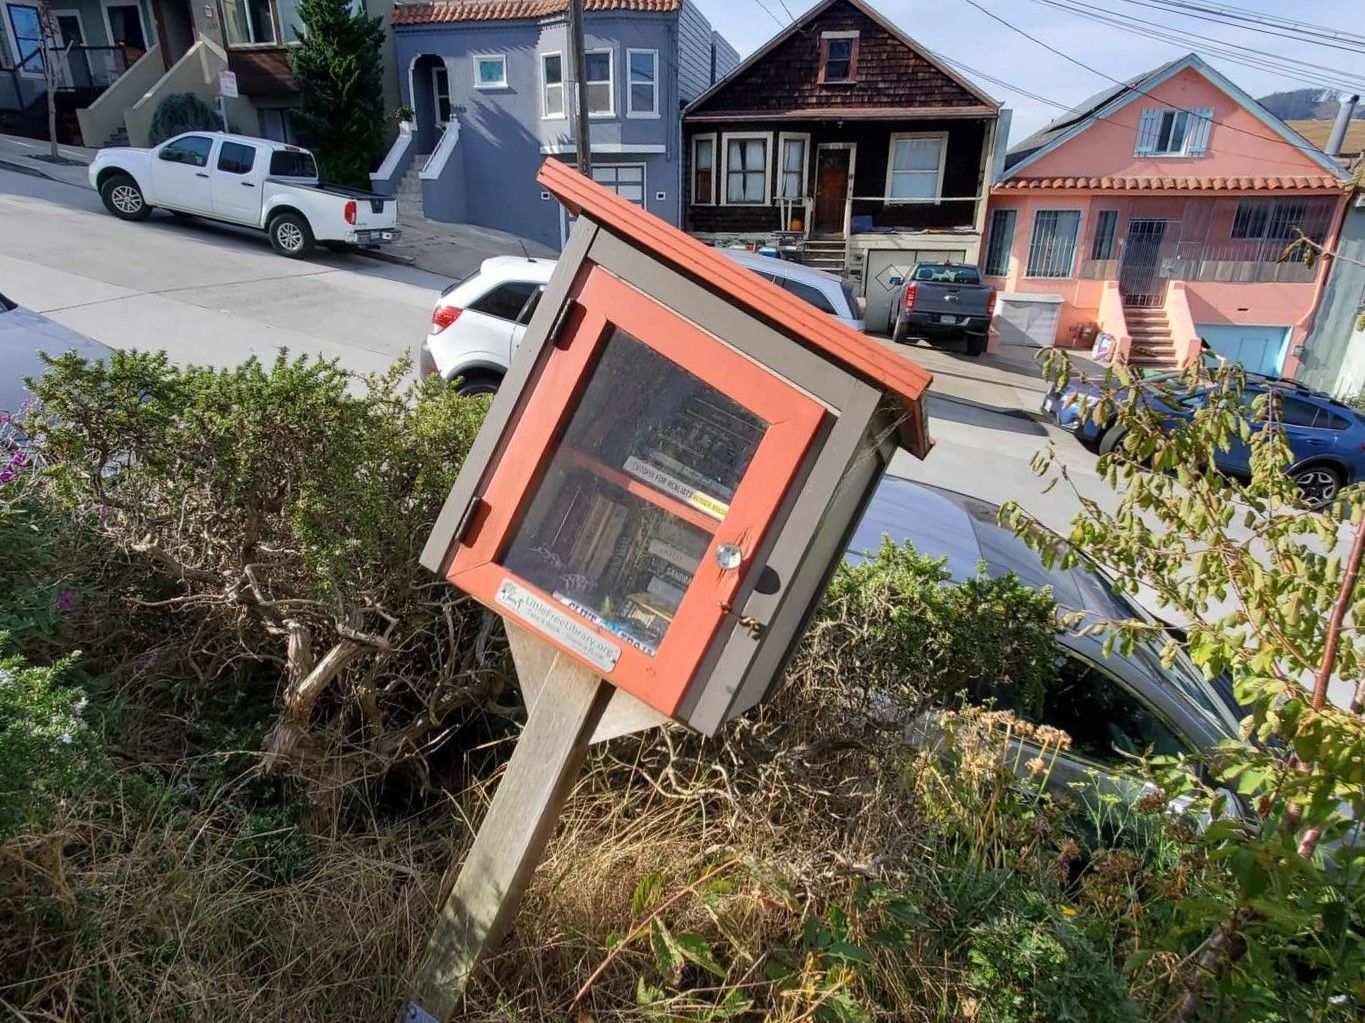 A library box stands in an overgrown area on the sidewalk.